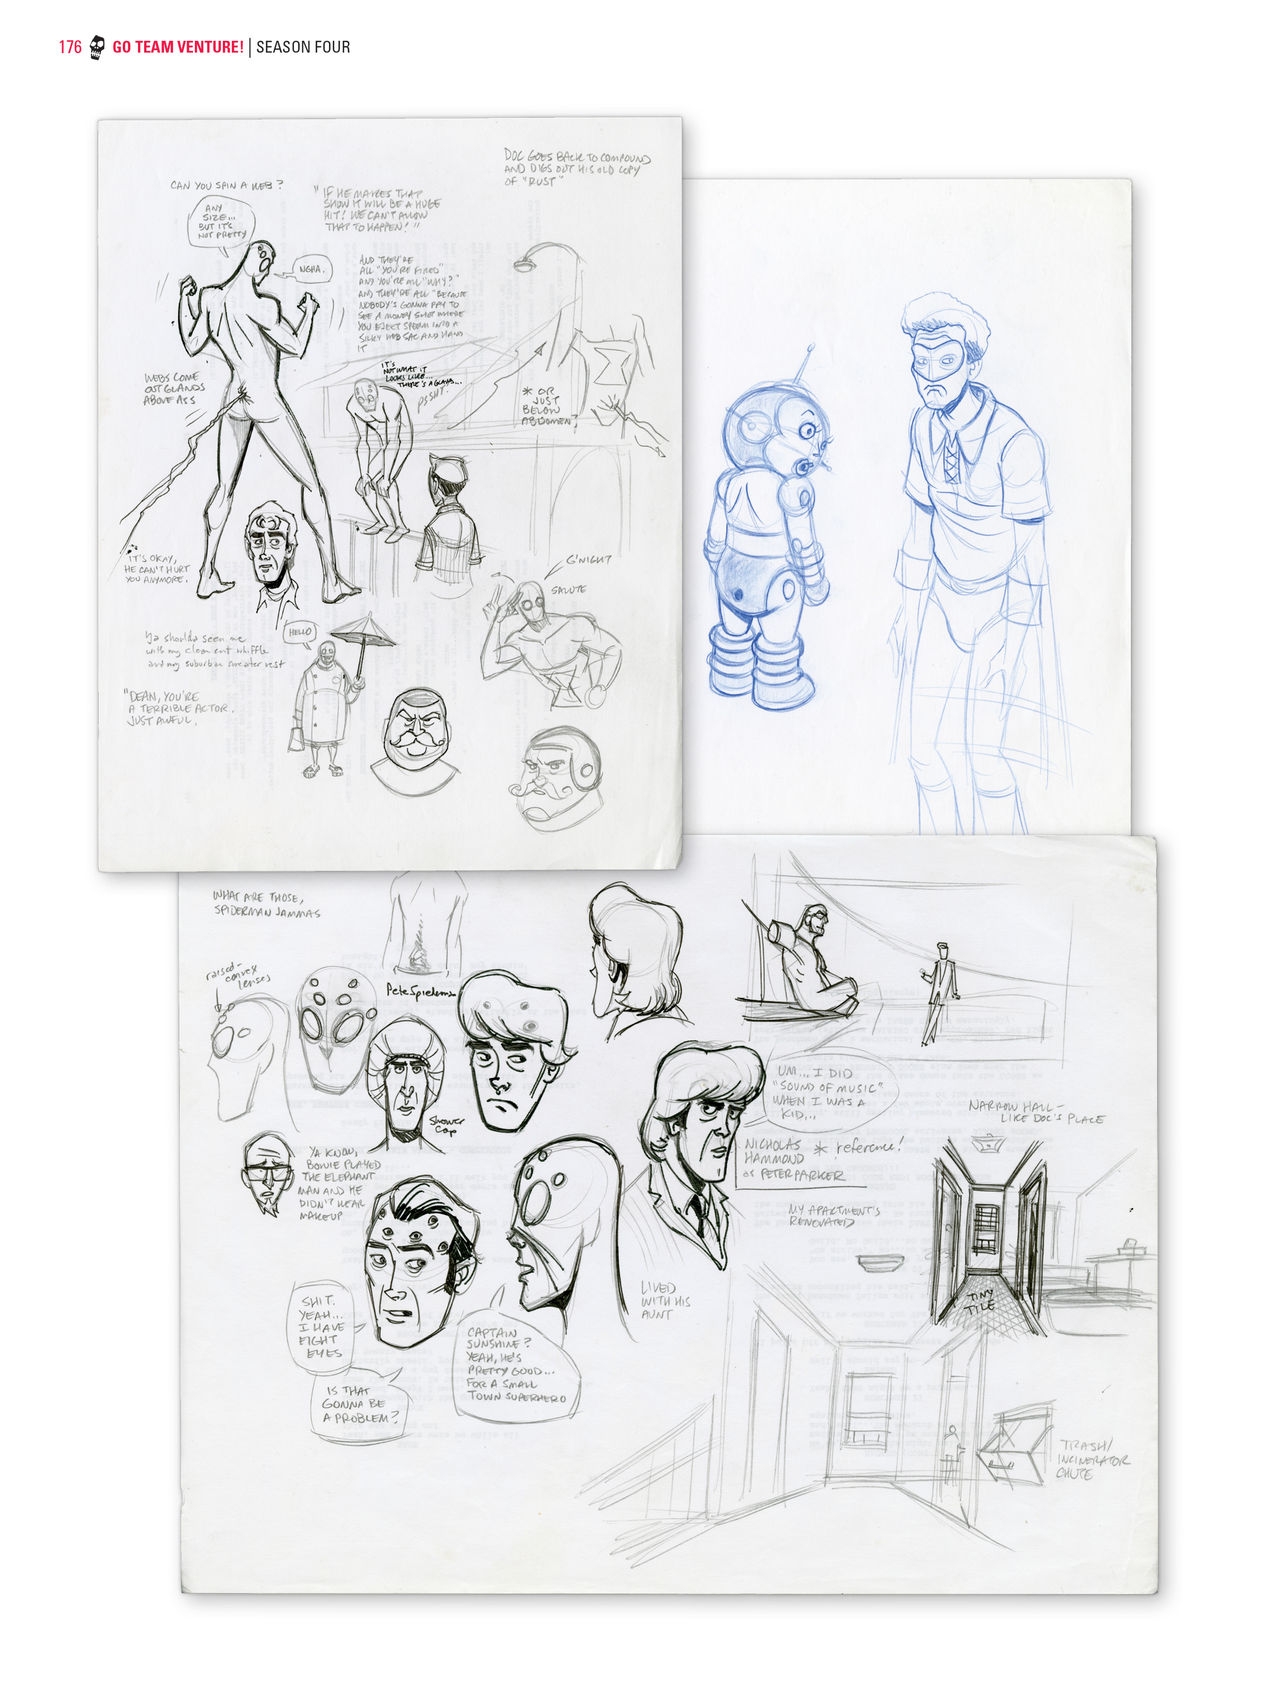 Go Team Venture! - The Art and Making of the Venture Bros 174